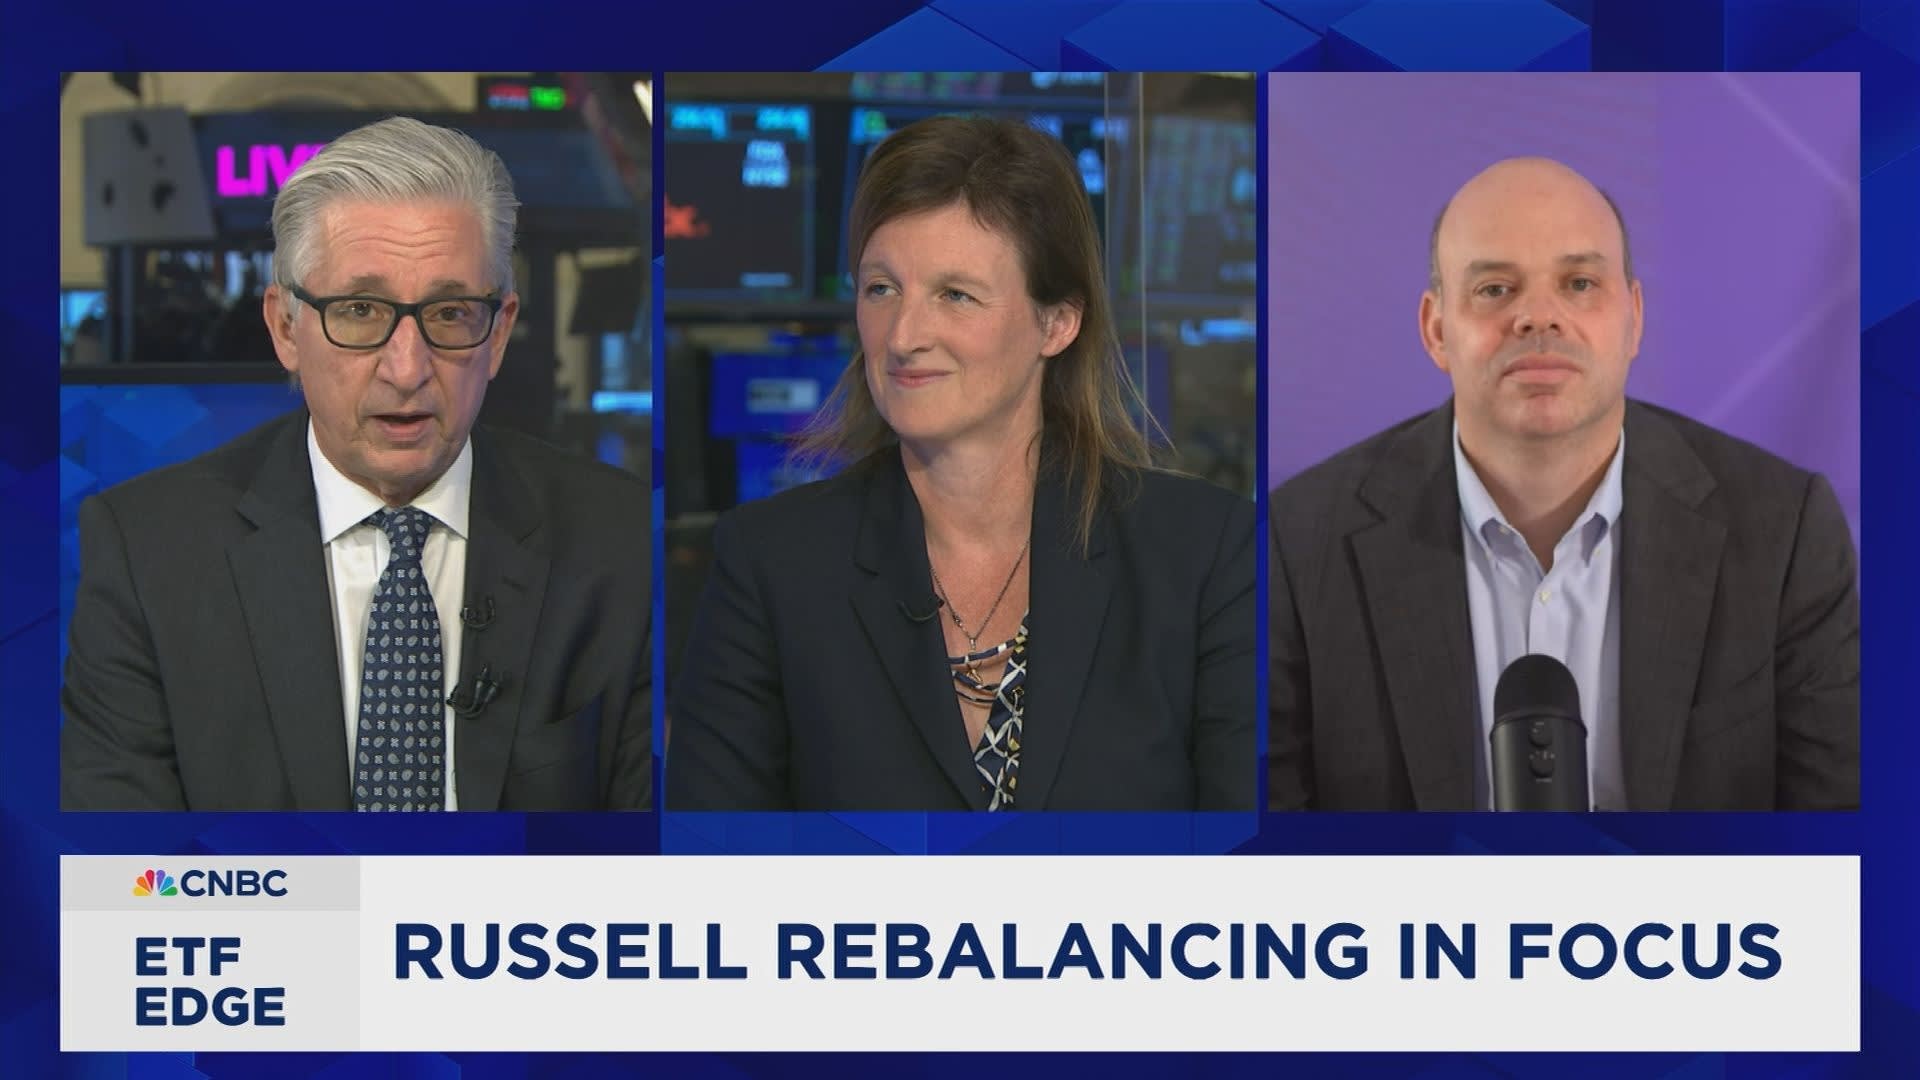 What the Russell rebalancing means for investors